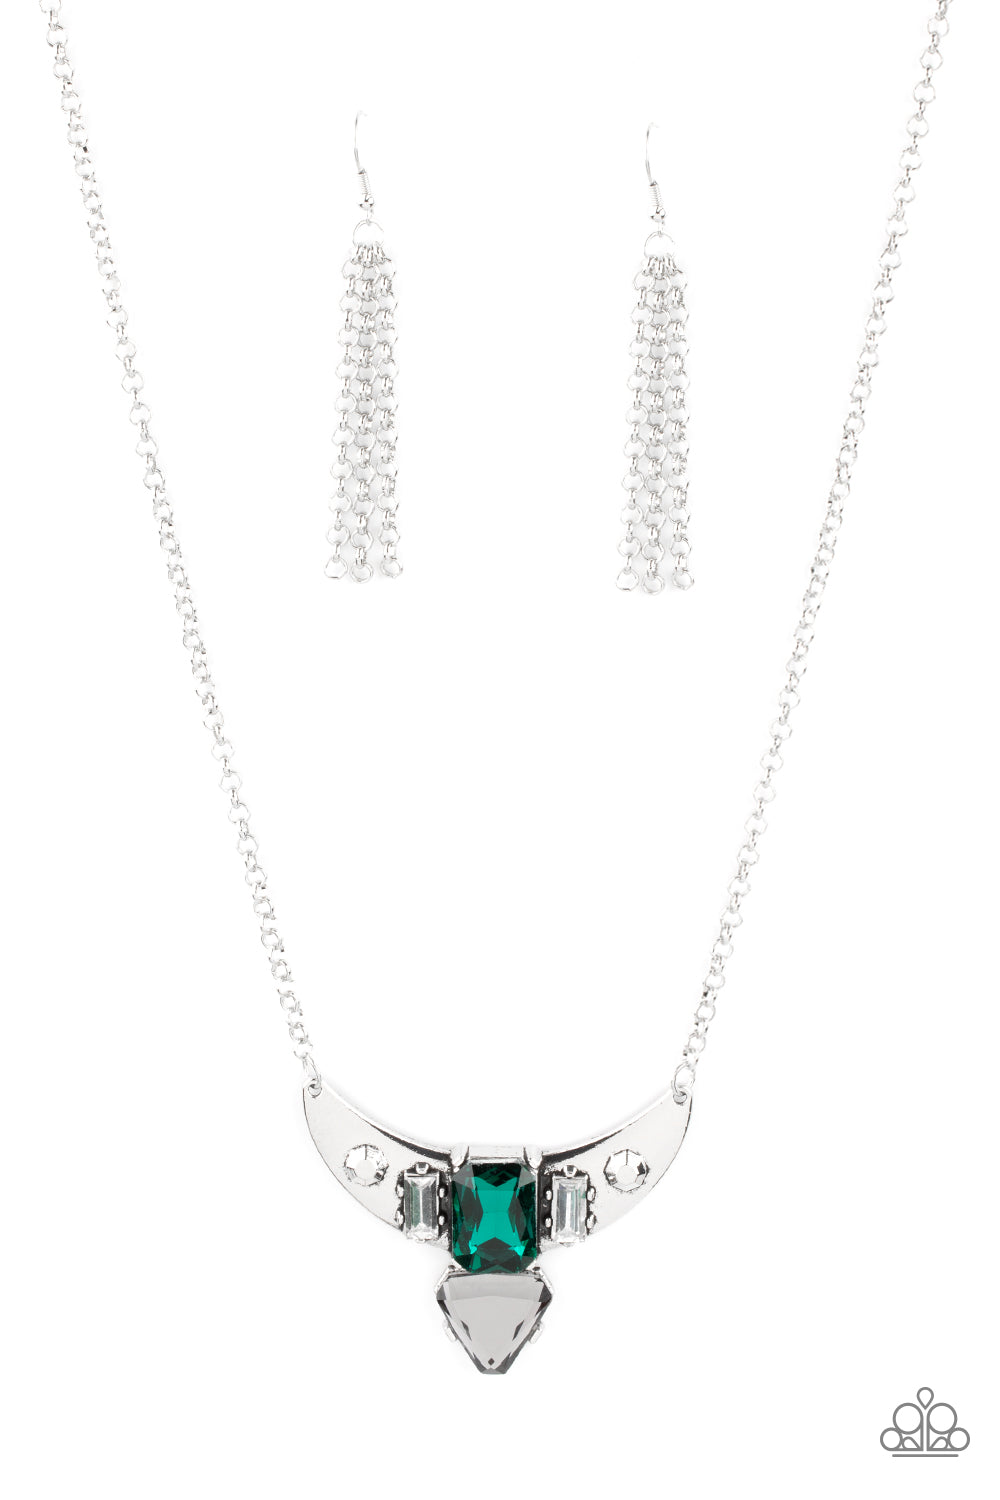 You the TALISMAN! Green Necklace - Paparazzi Accessories  Pairs of faceted silver beads and glassy white emerald cut gems flank an oversized emerald cut green gem atop an antiqued silver half moon frame. A smoky triangular cut gem adorns the bottom of the pendant, creating a twinkly talisman at the bottom of a classic silver chain. Features an adjustable clasp closure.  All Paparazzi Accessories are lead free and nickel free!  Sold as one individual necklace. Includes one pair of matching earrings.